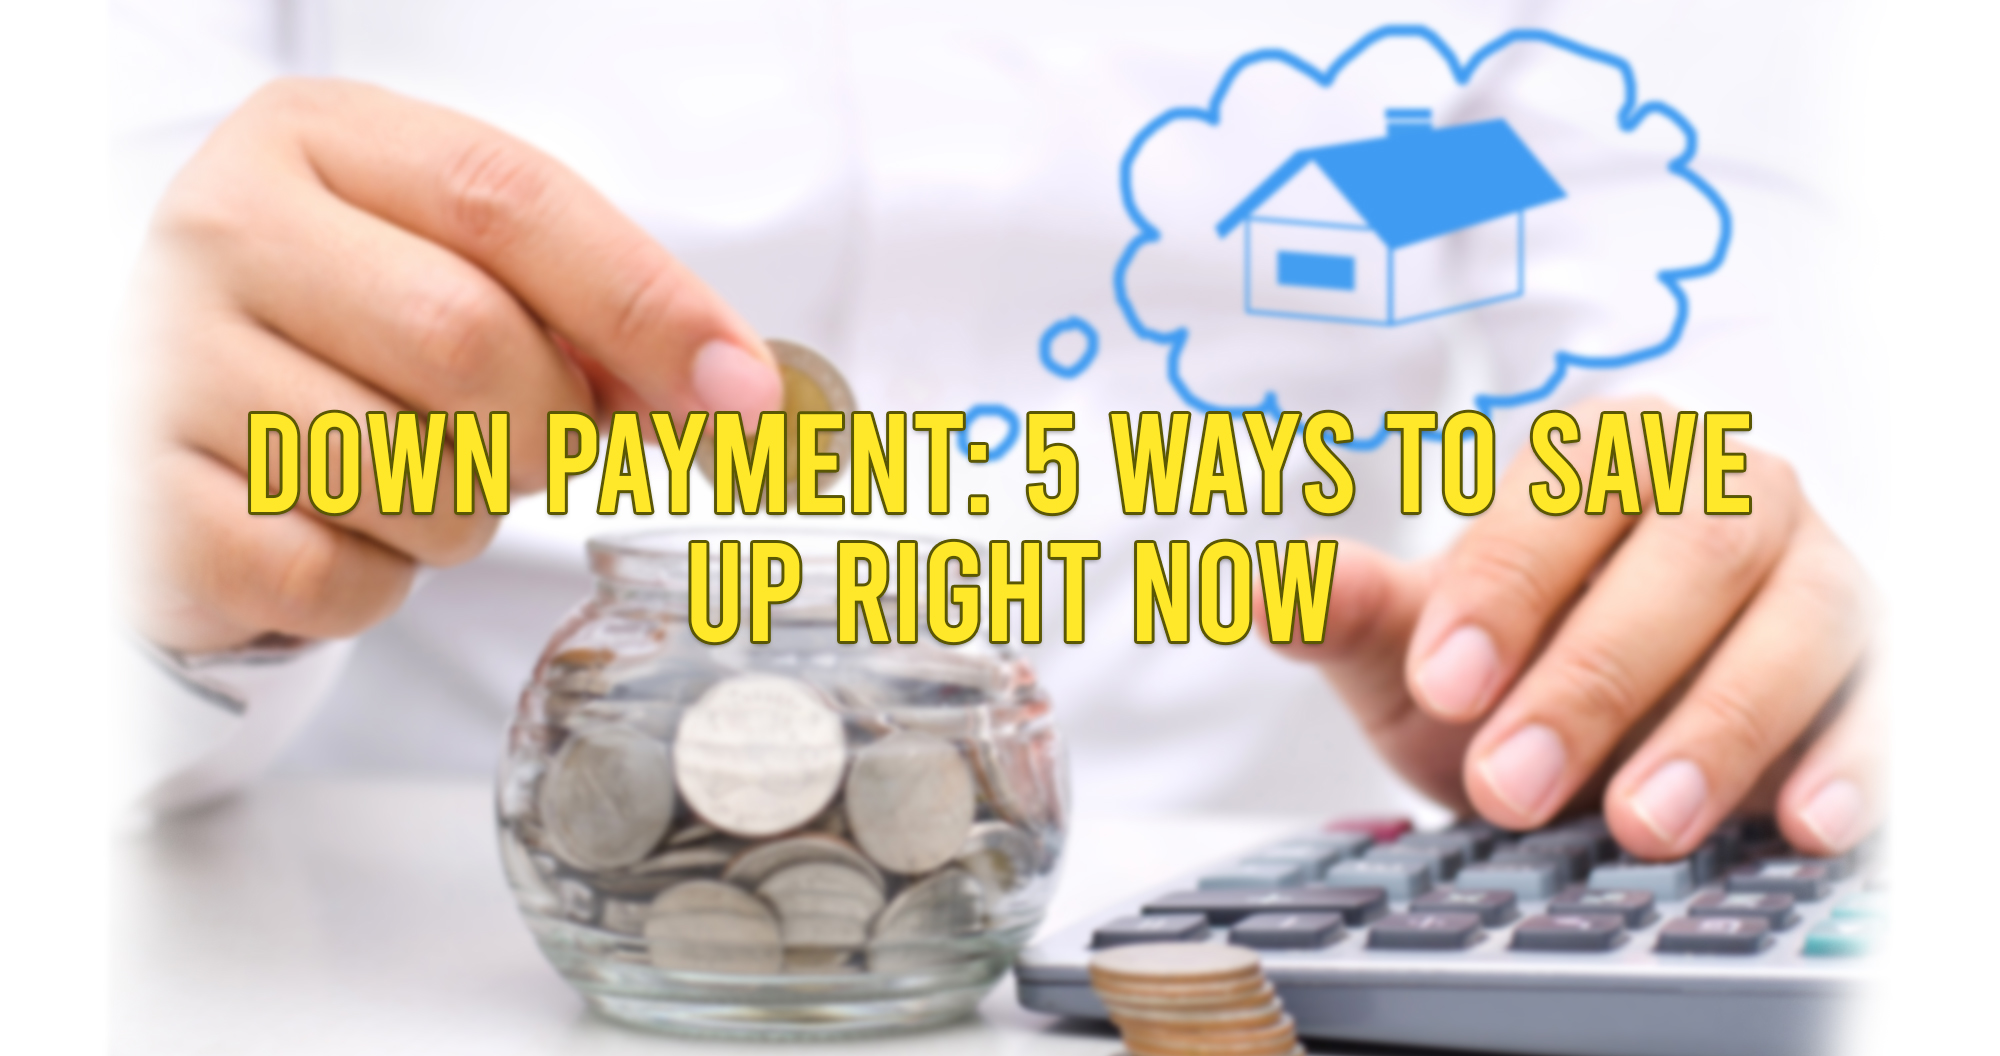 Down Payment: 5 Ways to Save Up Right Now